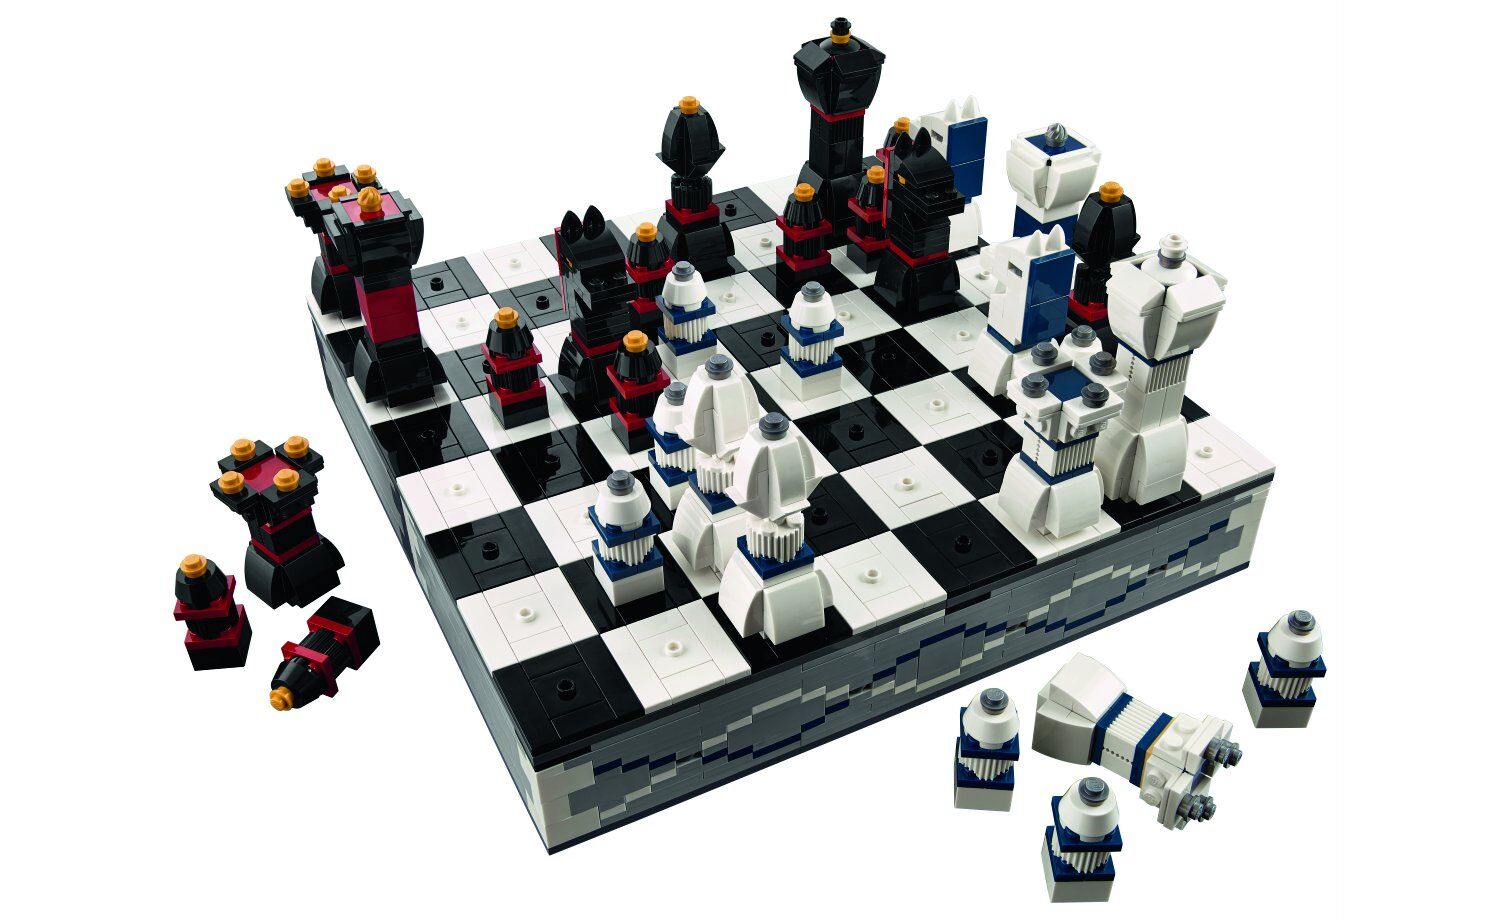 LEGO Iconic Chess Set for sale online 40174